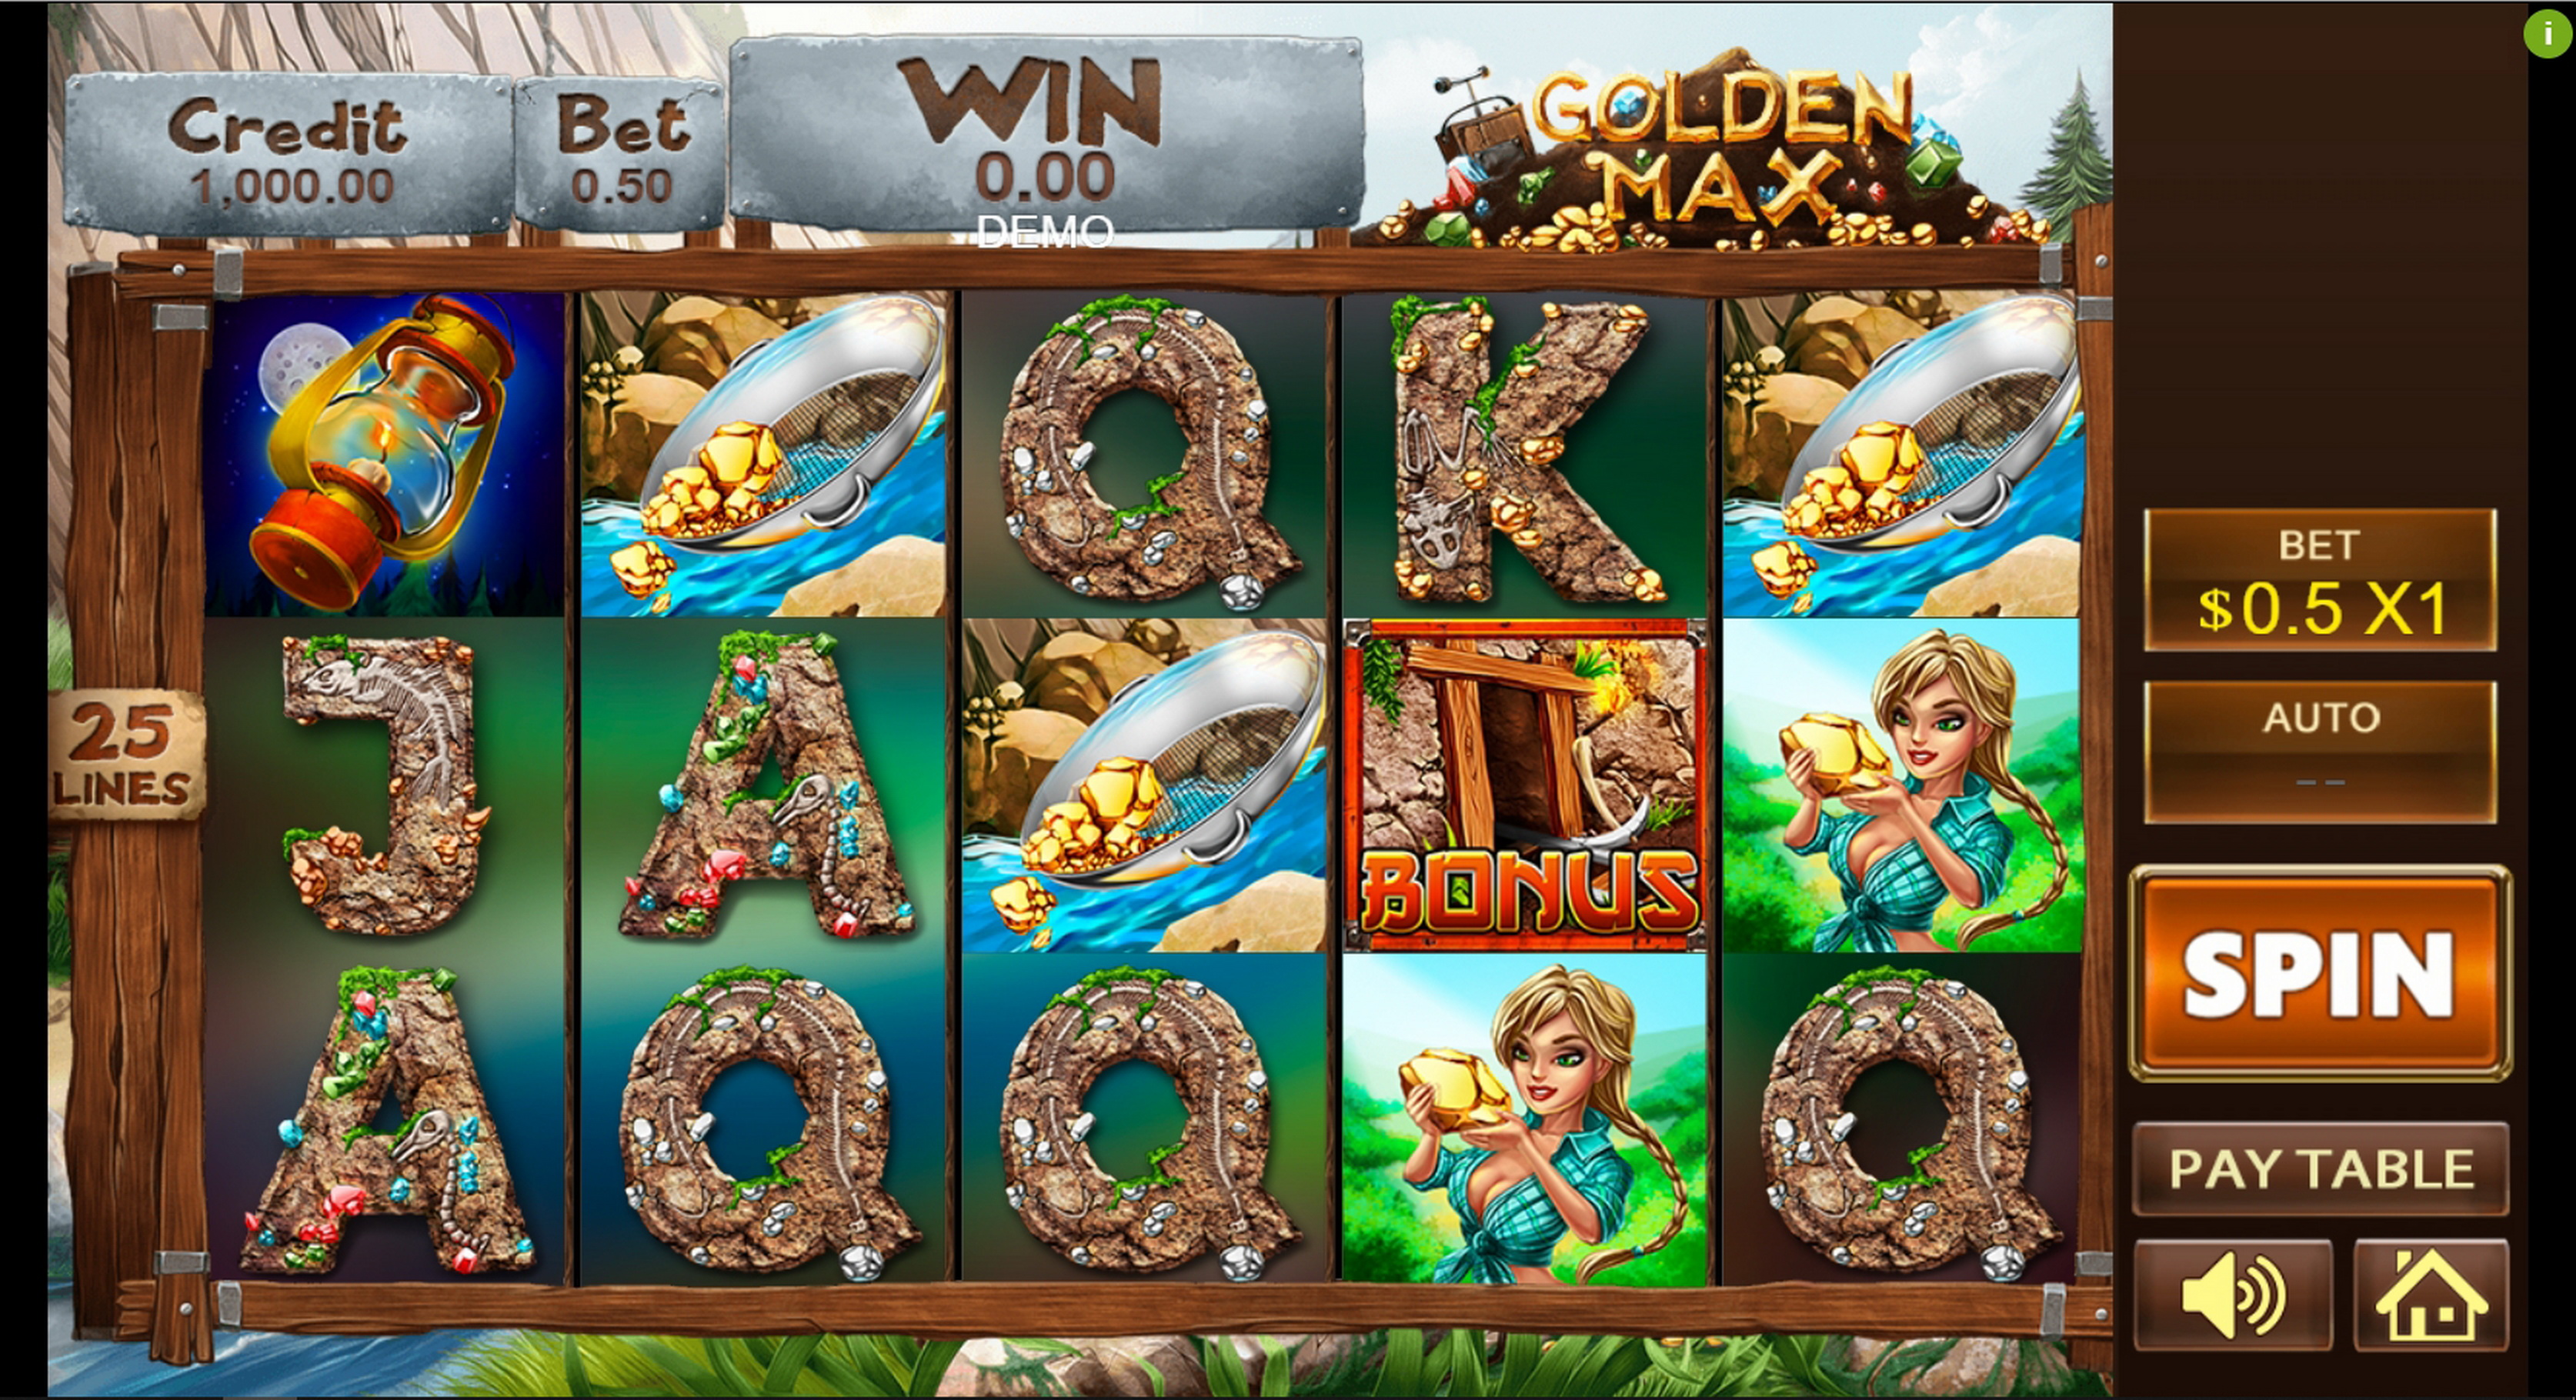 Reels in Golden Max Slot Game by PlayStar